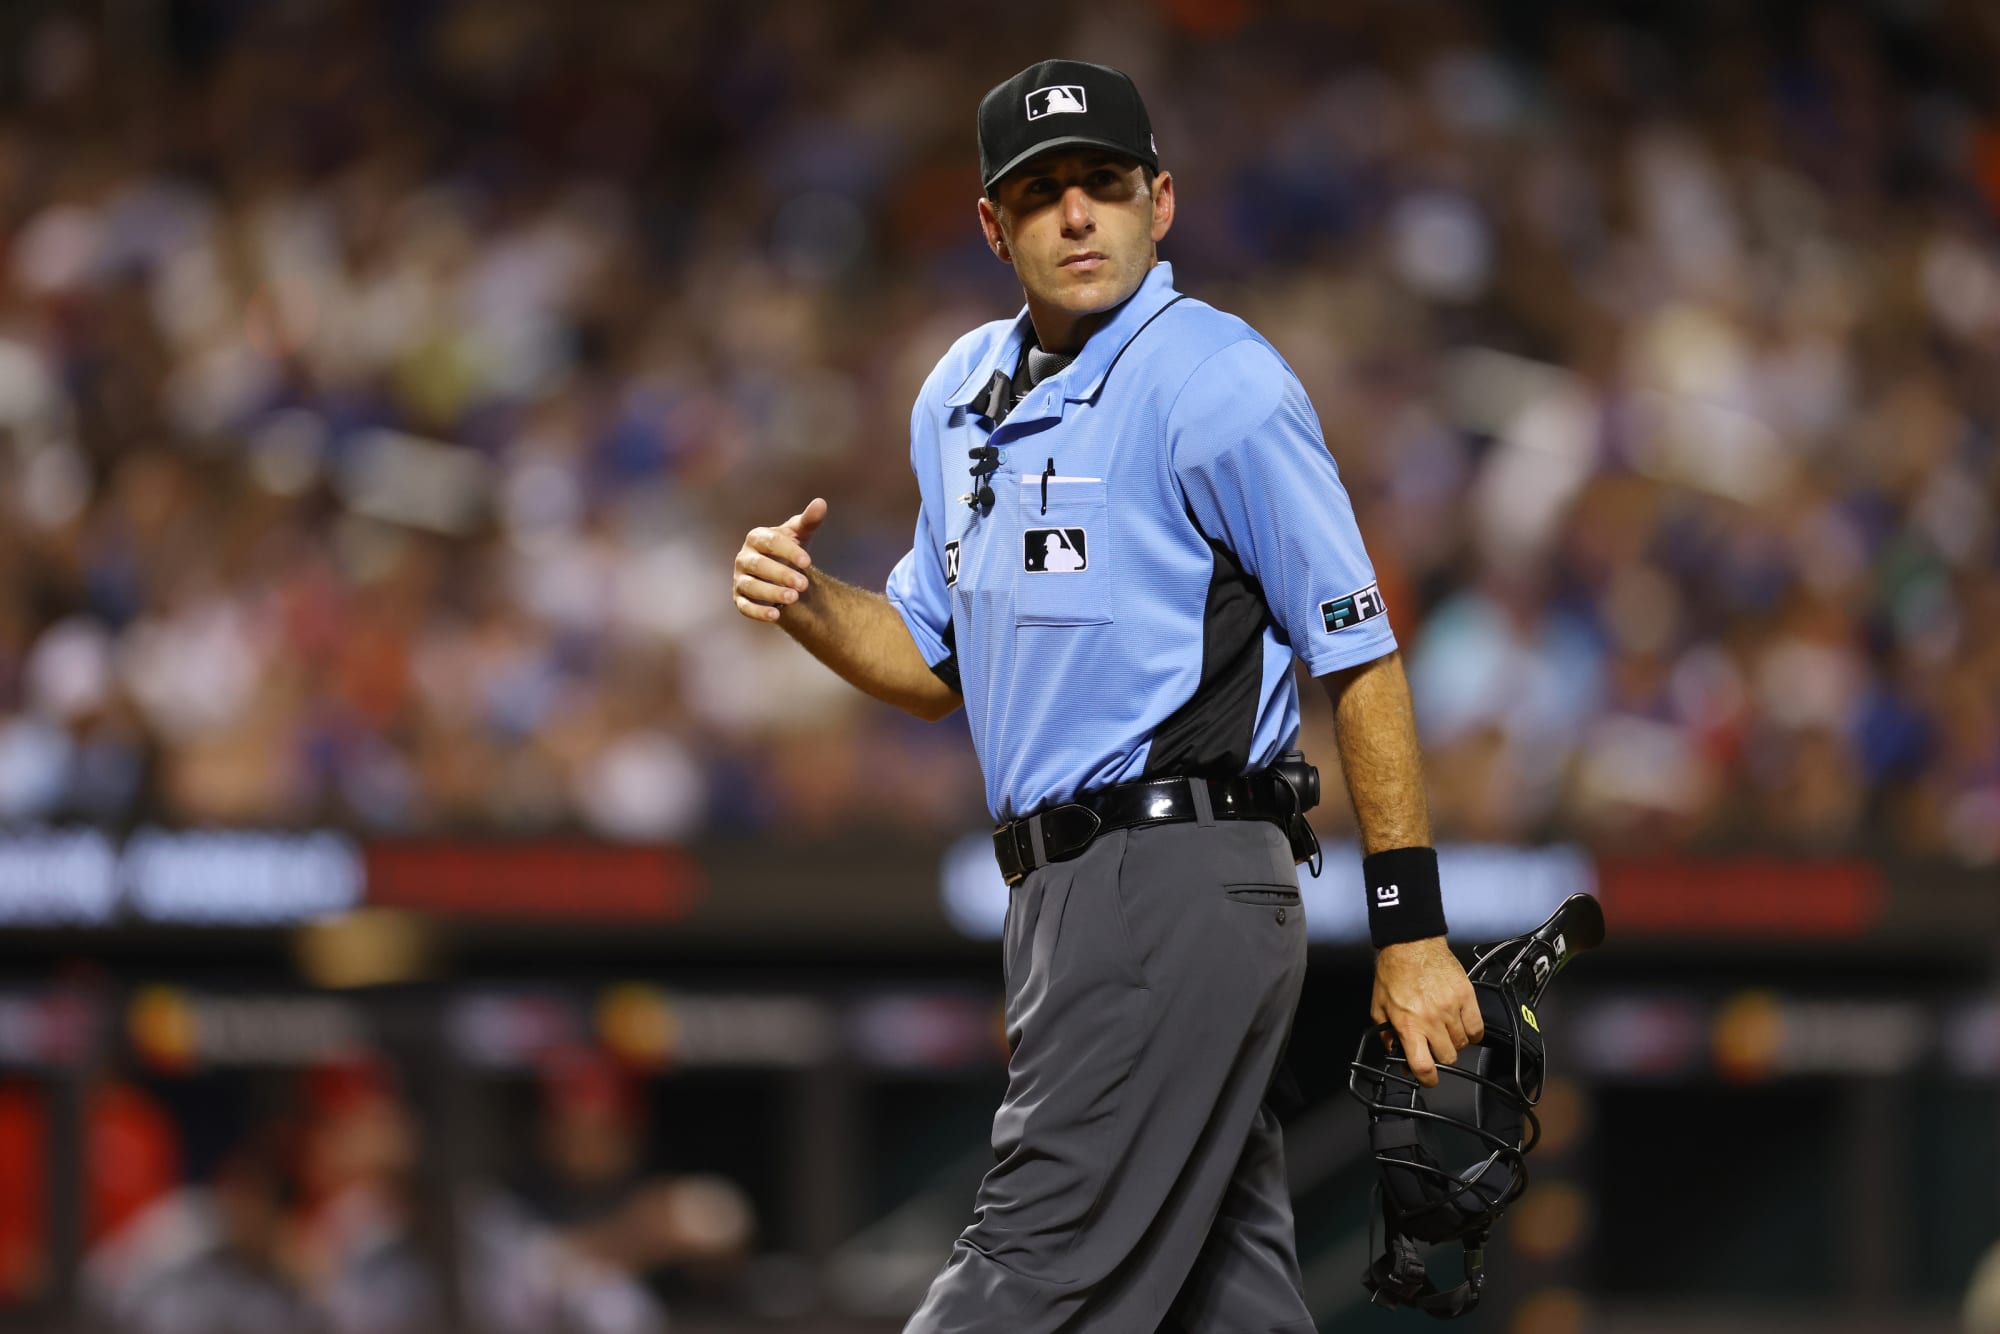 MLB umpire with ties to Greenville announces retirement